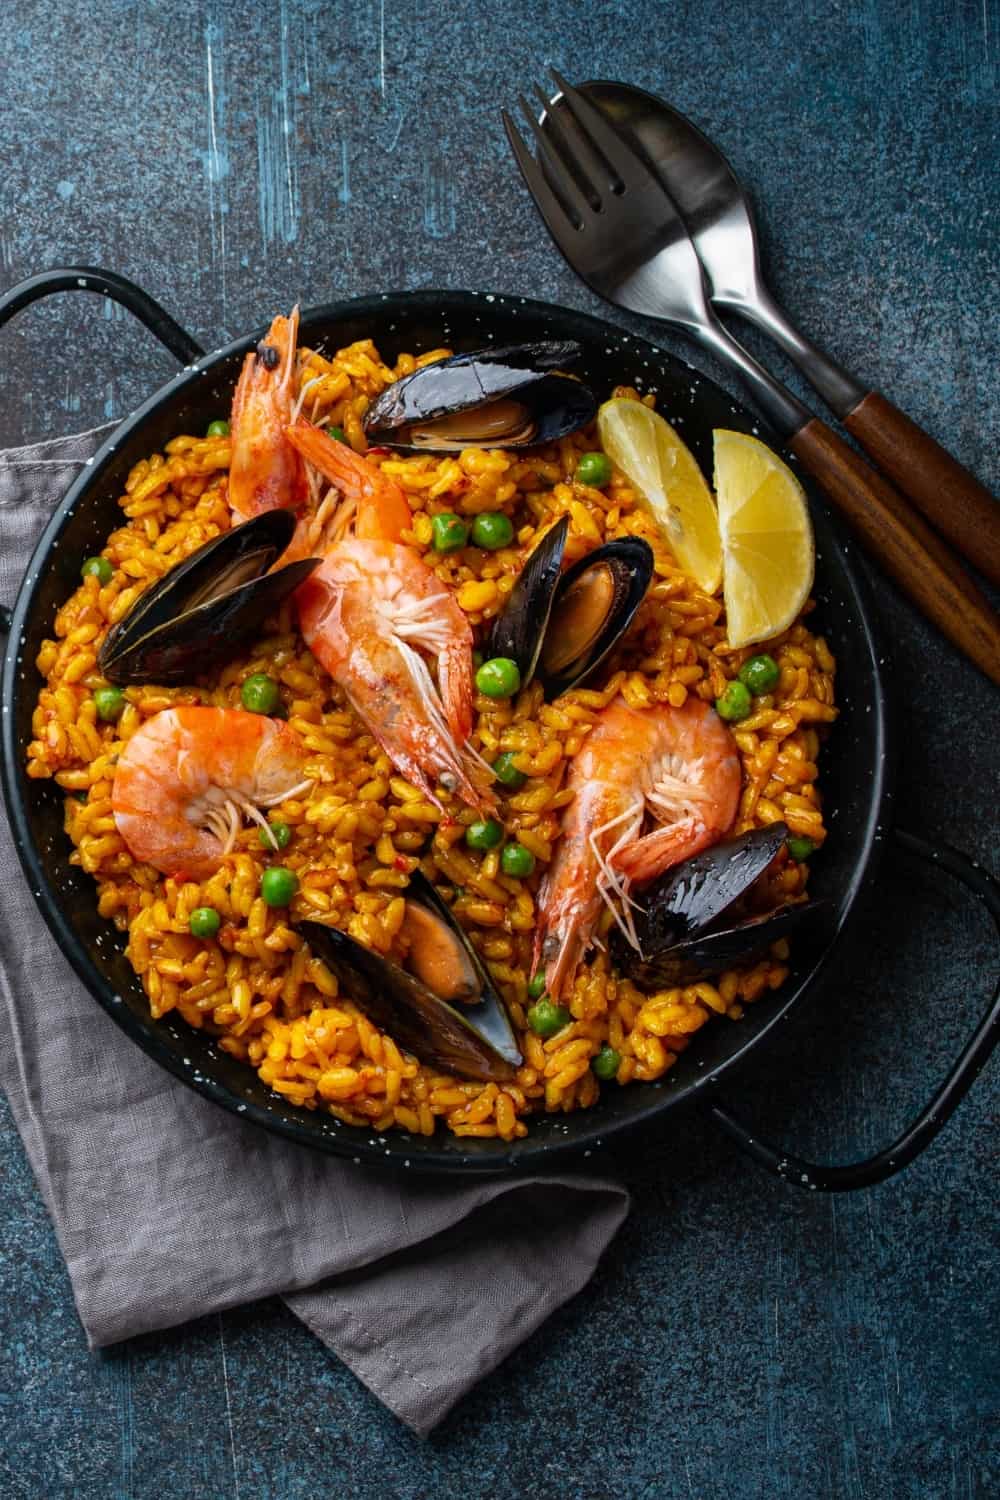 Classic dish of Spain, seafood paella in traditional pan on blue stone background top view